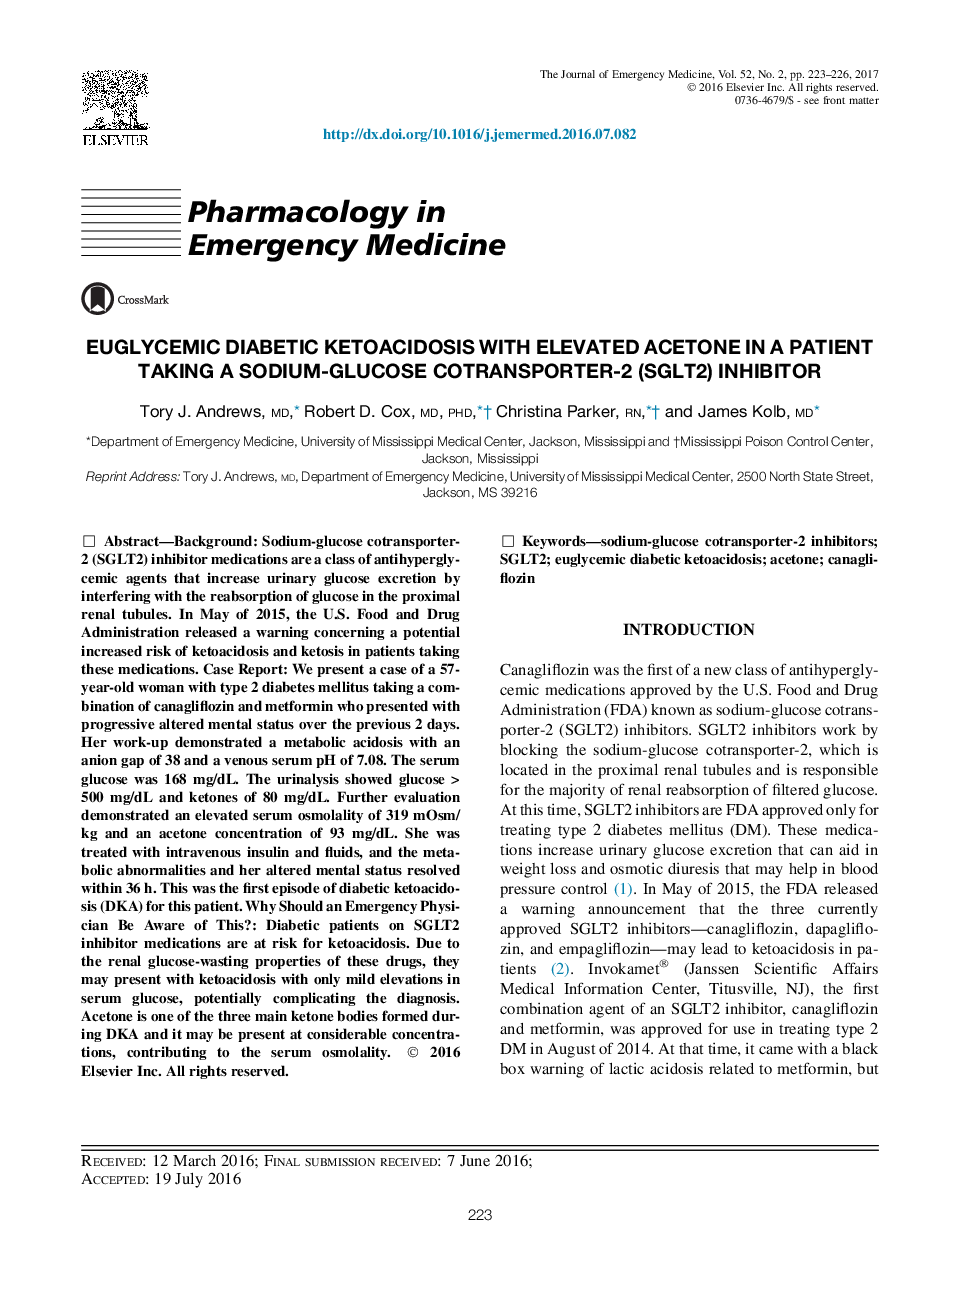 Euglycemic Diabetic Ketoacidosis with Elevated Acetone in a Patient Taking a Sodium-Glucose Cotransporter-2 (SGLT2) Inhibitor